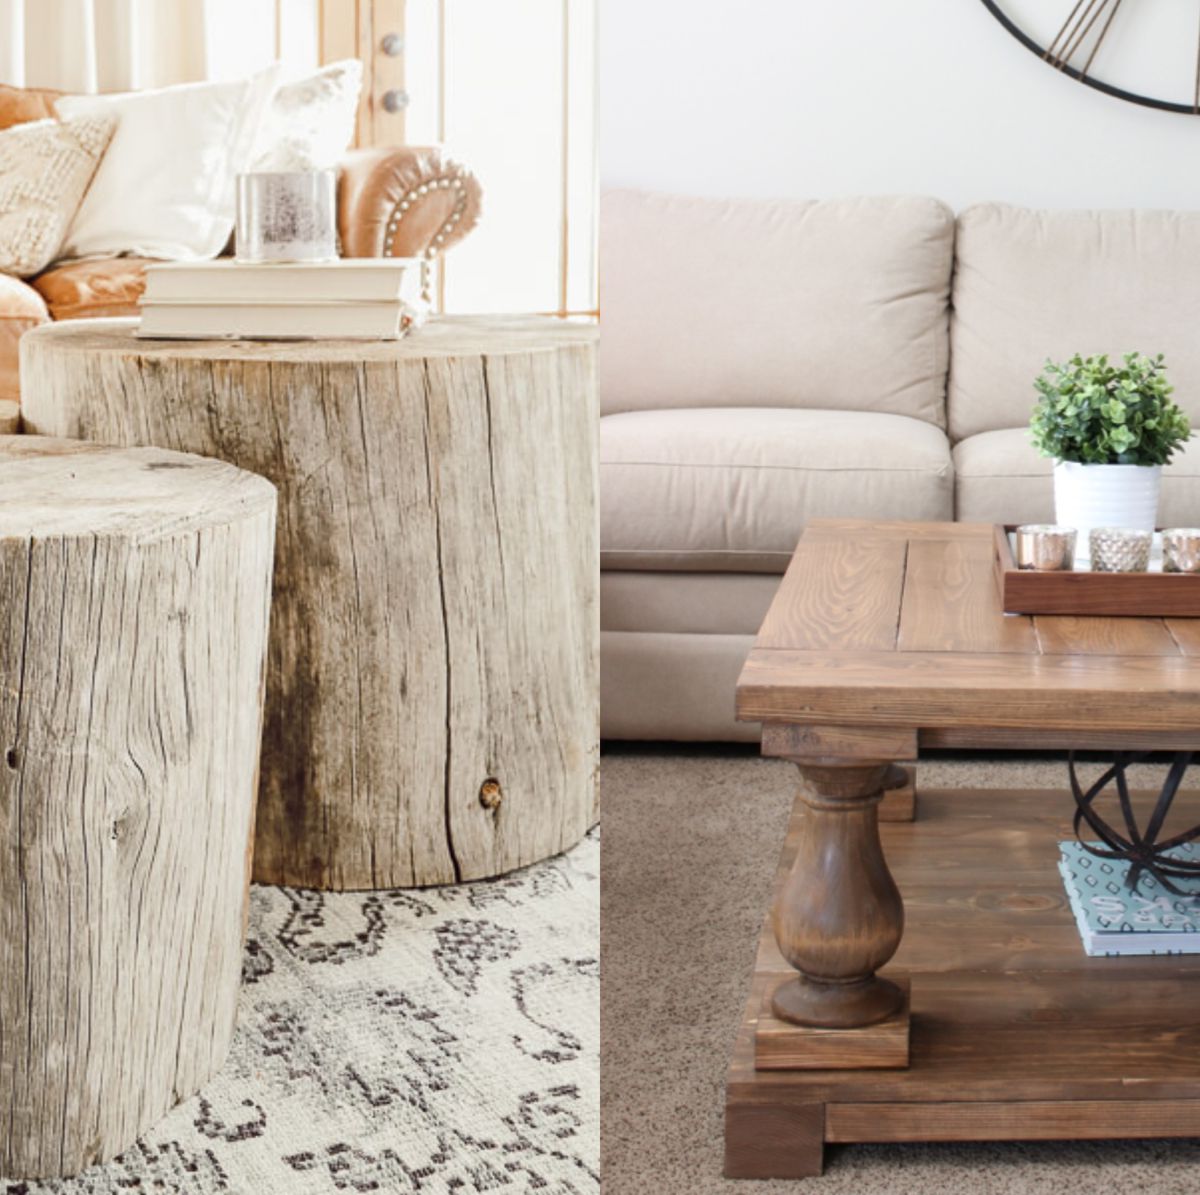 How To Build A Modern Coffee Table For Under $100 - Addicted 2 DIY